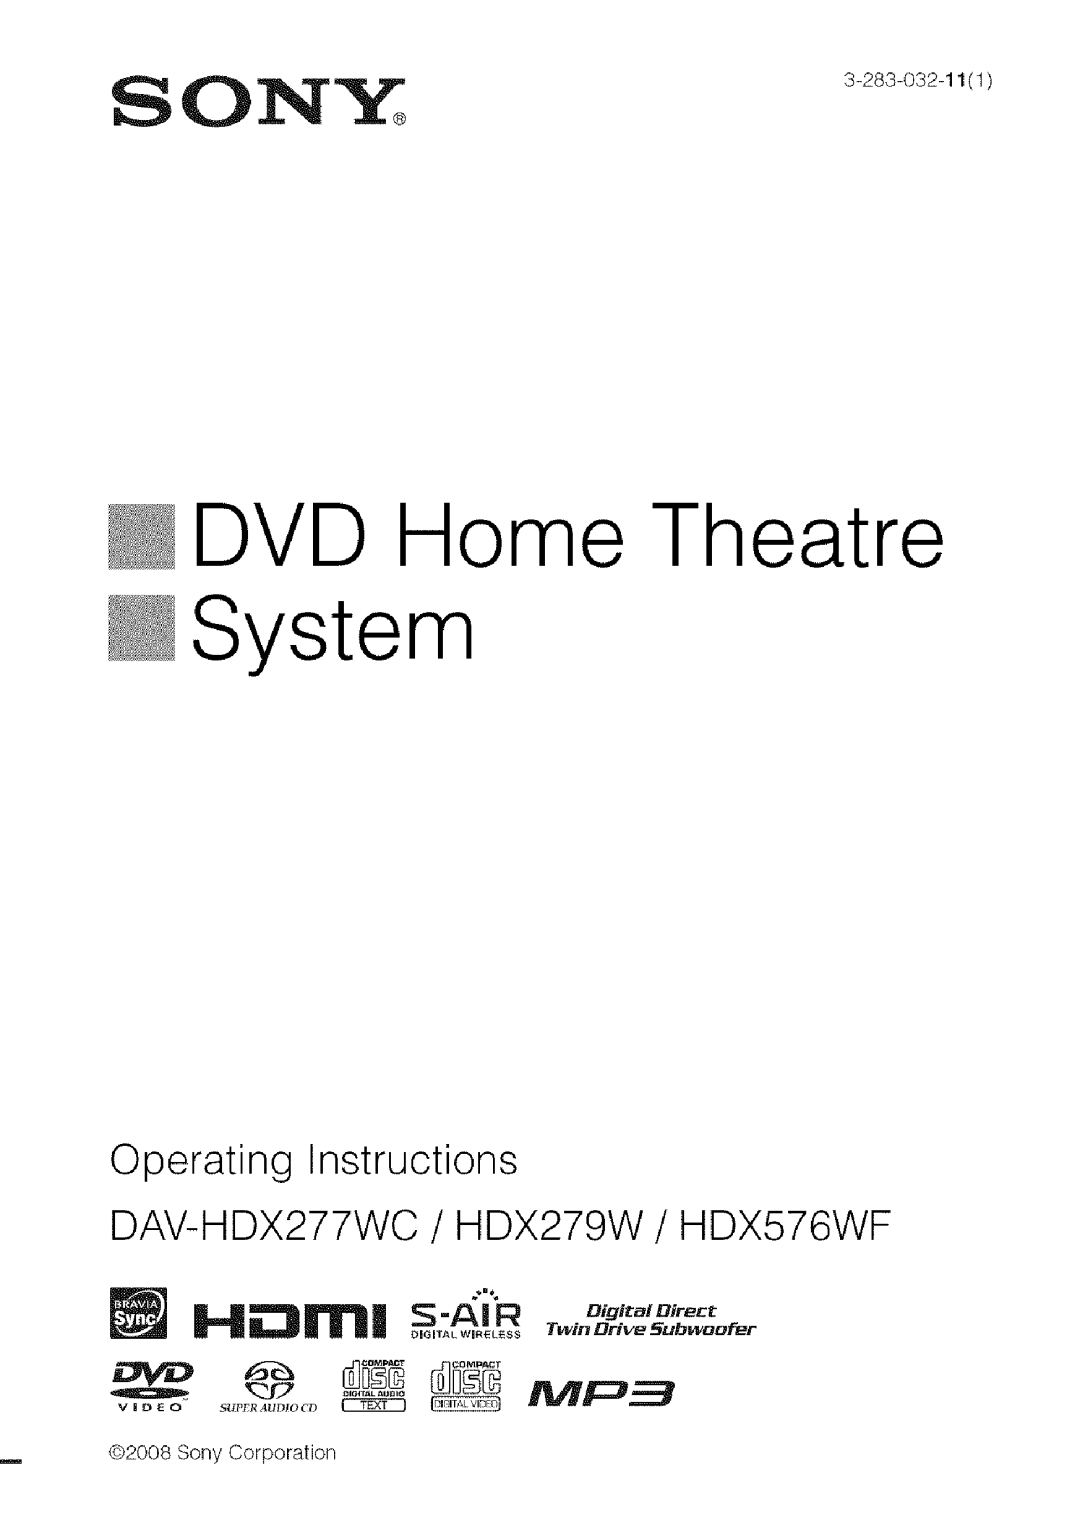 Sony manual ON._3283o3211/1, Operating Instructions, DAV-HDX277WC / HDX279W / HDX576WF, @DVD Home Theatre @System 